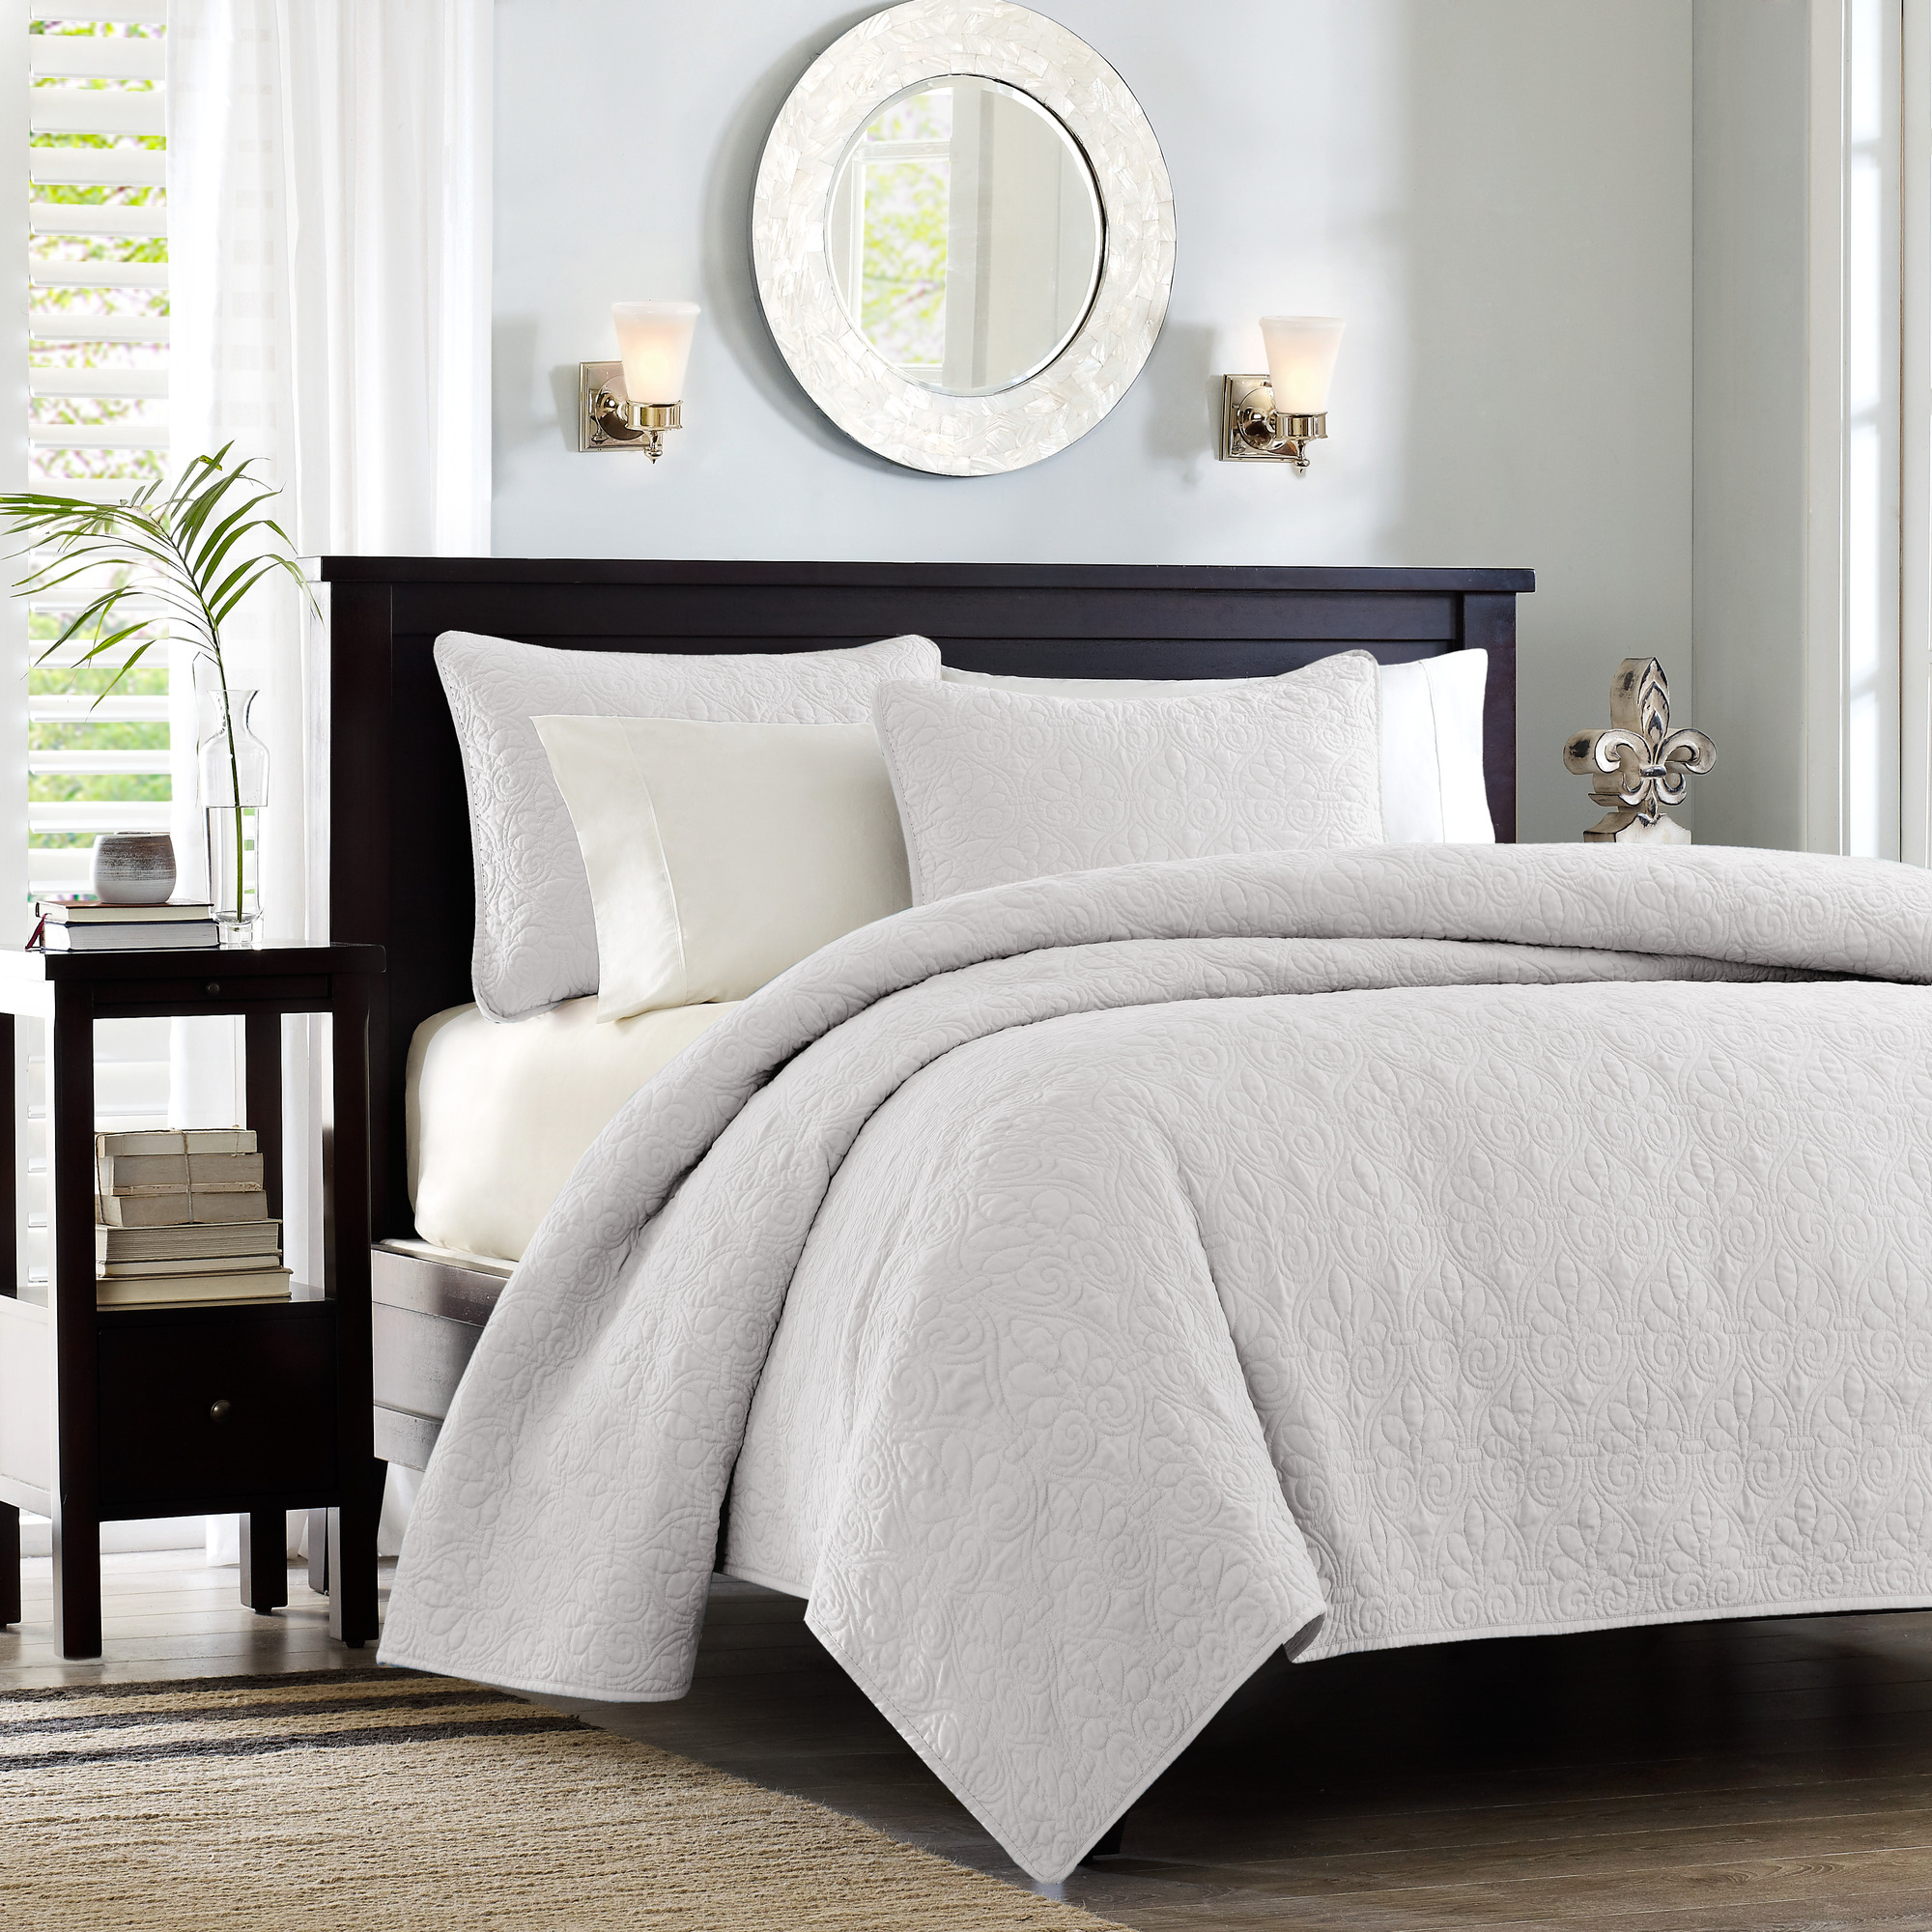 Home Essence Vancouver Super Soft Reversible Coverlet Set, King/Cal King, White - image 1 of 14